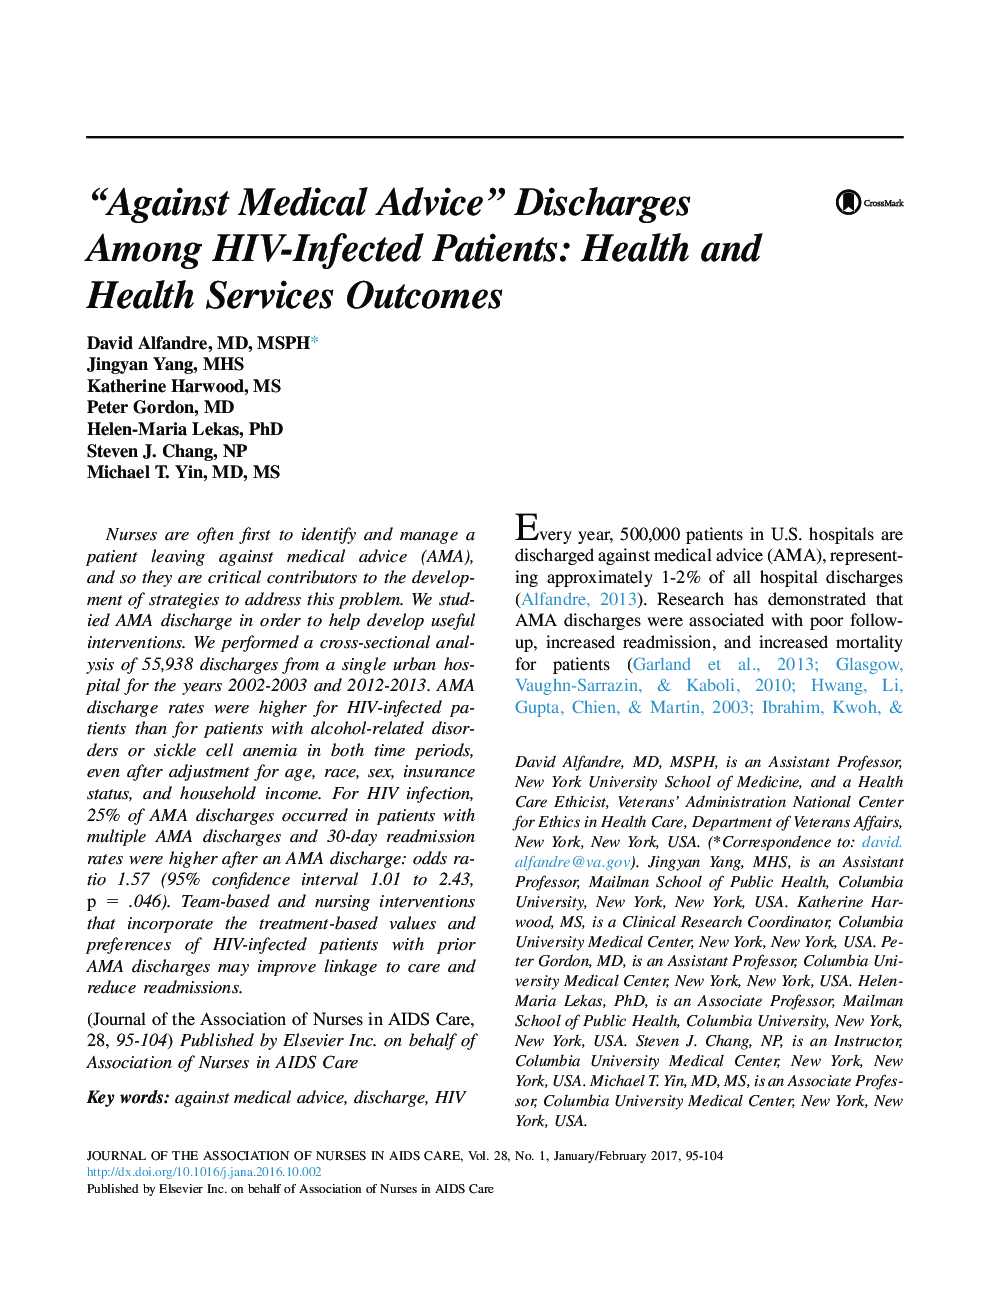 “Against Medical Advice” Discharges Among HIV-Infected Patients: Health and Health Services Outcomes